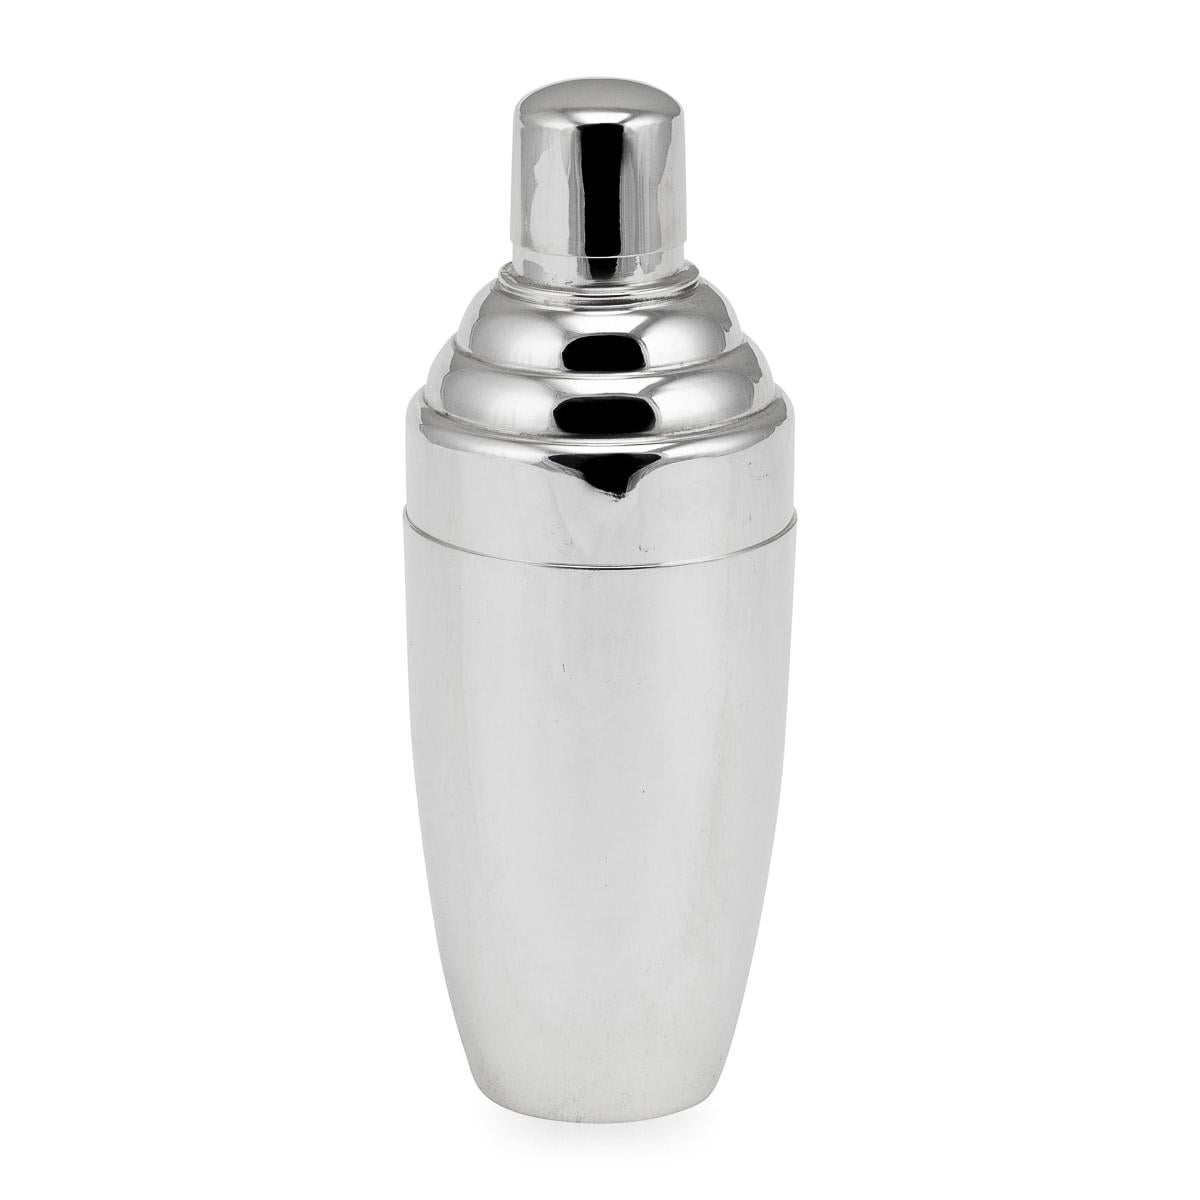 A charming silver plated cocktail shaker, of English origin and dating back to the middle part of the 20th century. Exquisite in its craftsmanship, the cocktail shaker is of clear Art Deco form, reminiscent of the distinctive designs that